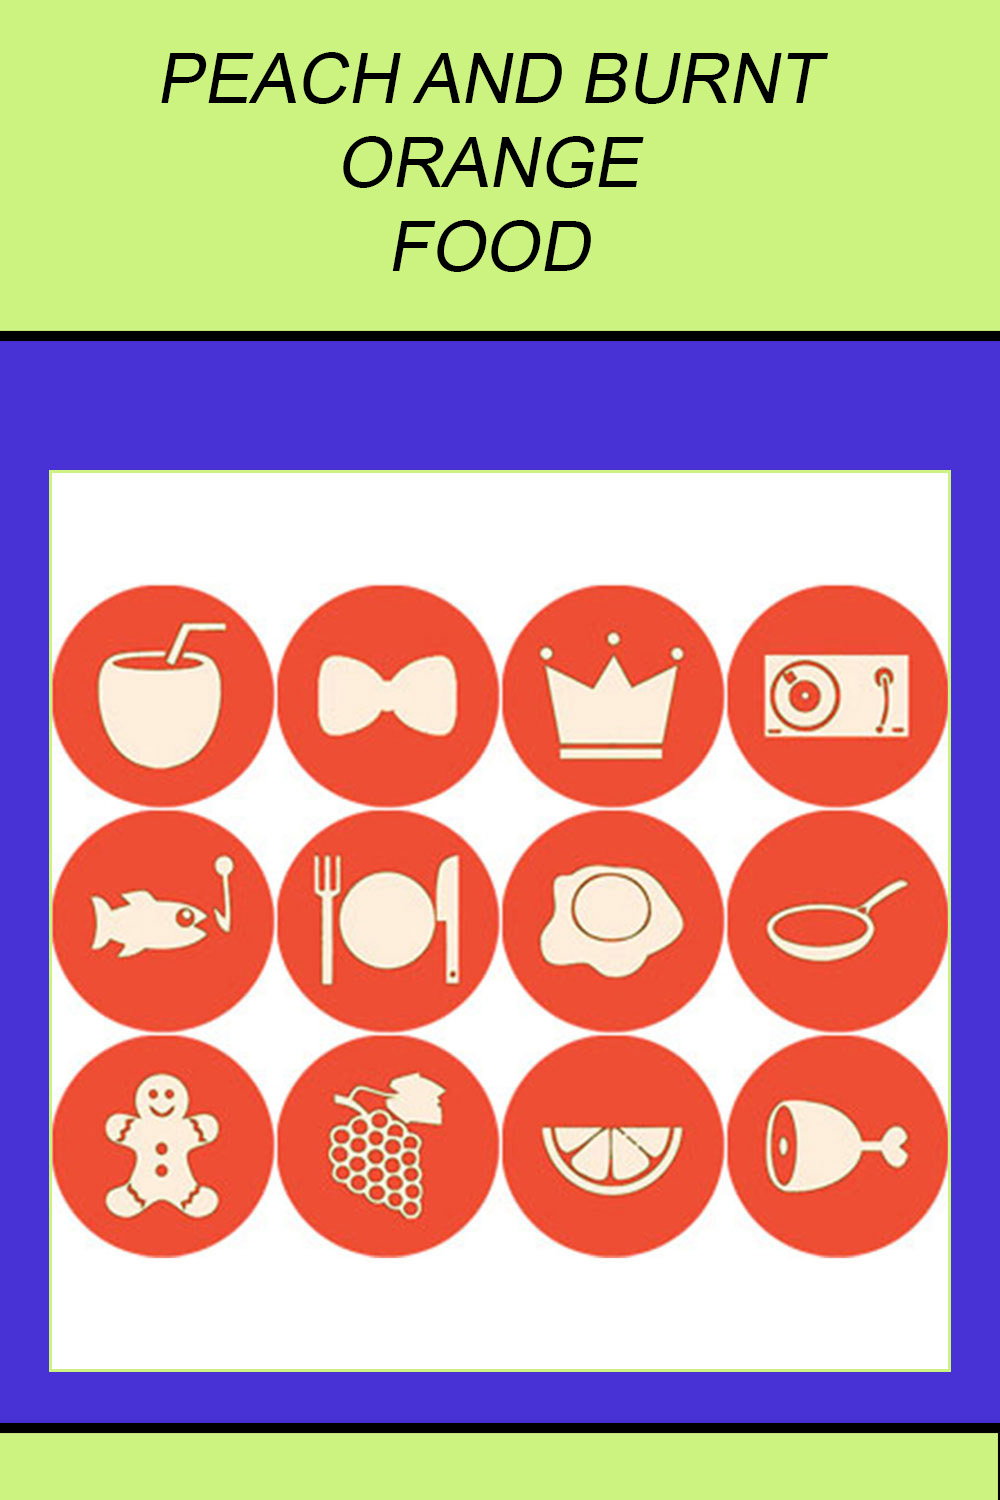 PEACH AND BURNT ORANGE FOOD ROUND ICONS pinterest preview image.